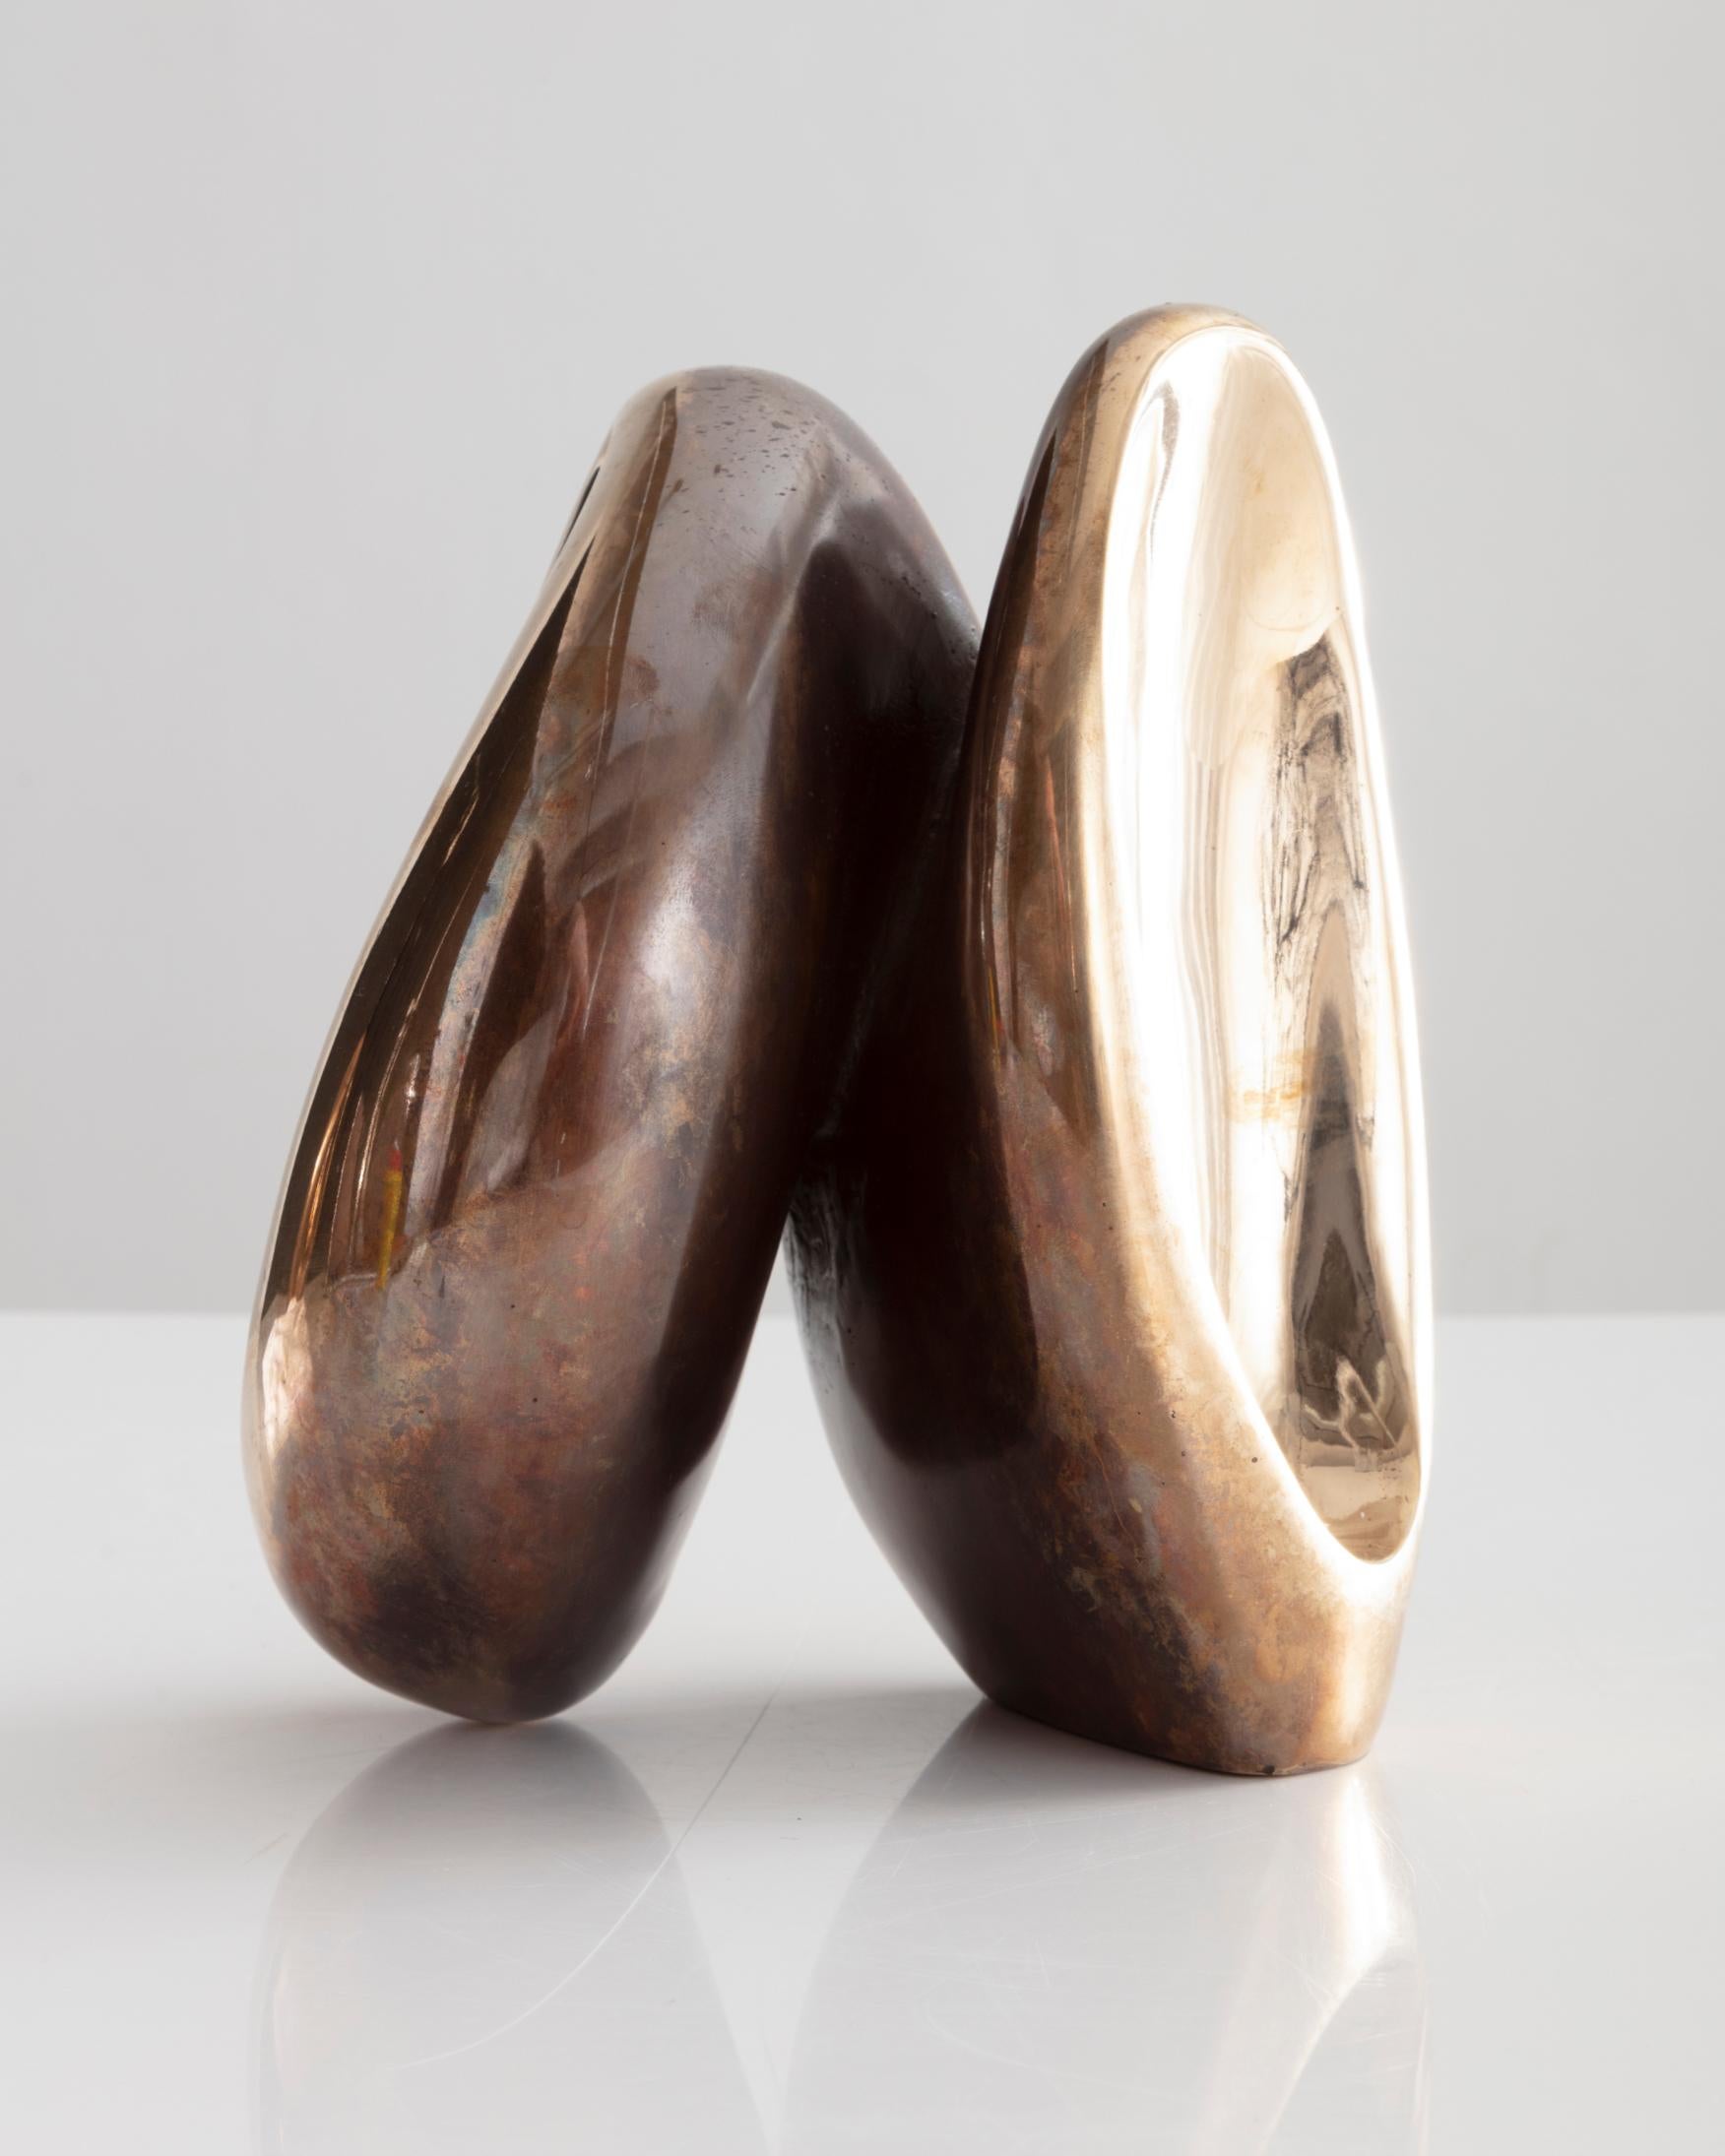 Fertility form double candleholder in cast, patinated, and polished bronze. Designed and made by Rogan Gregory, USA, 2018.
      